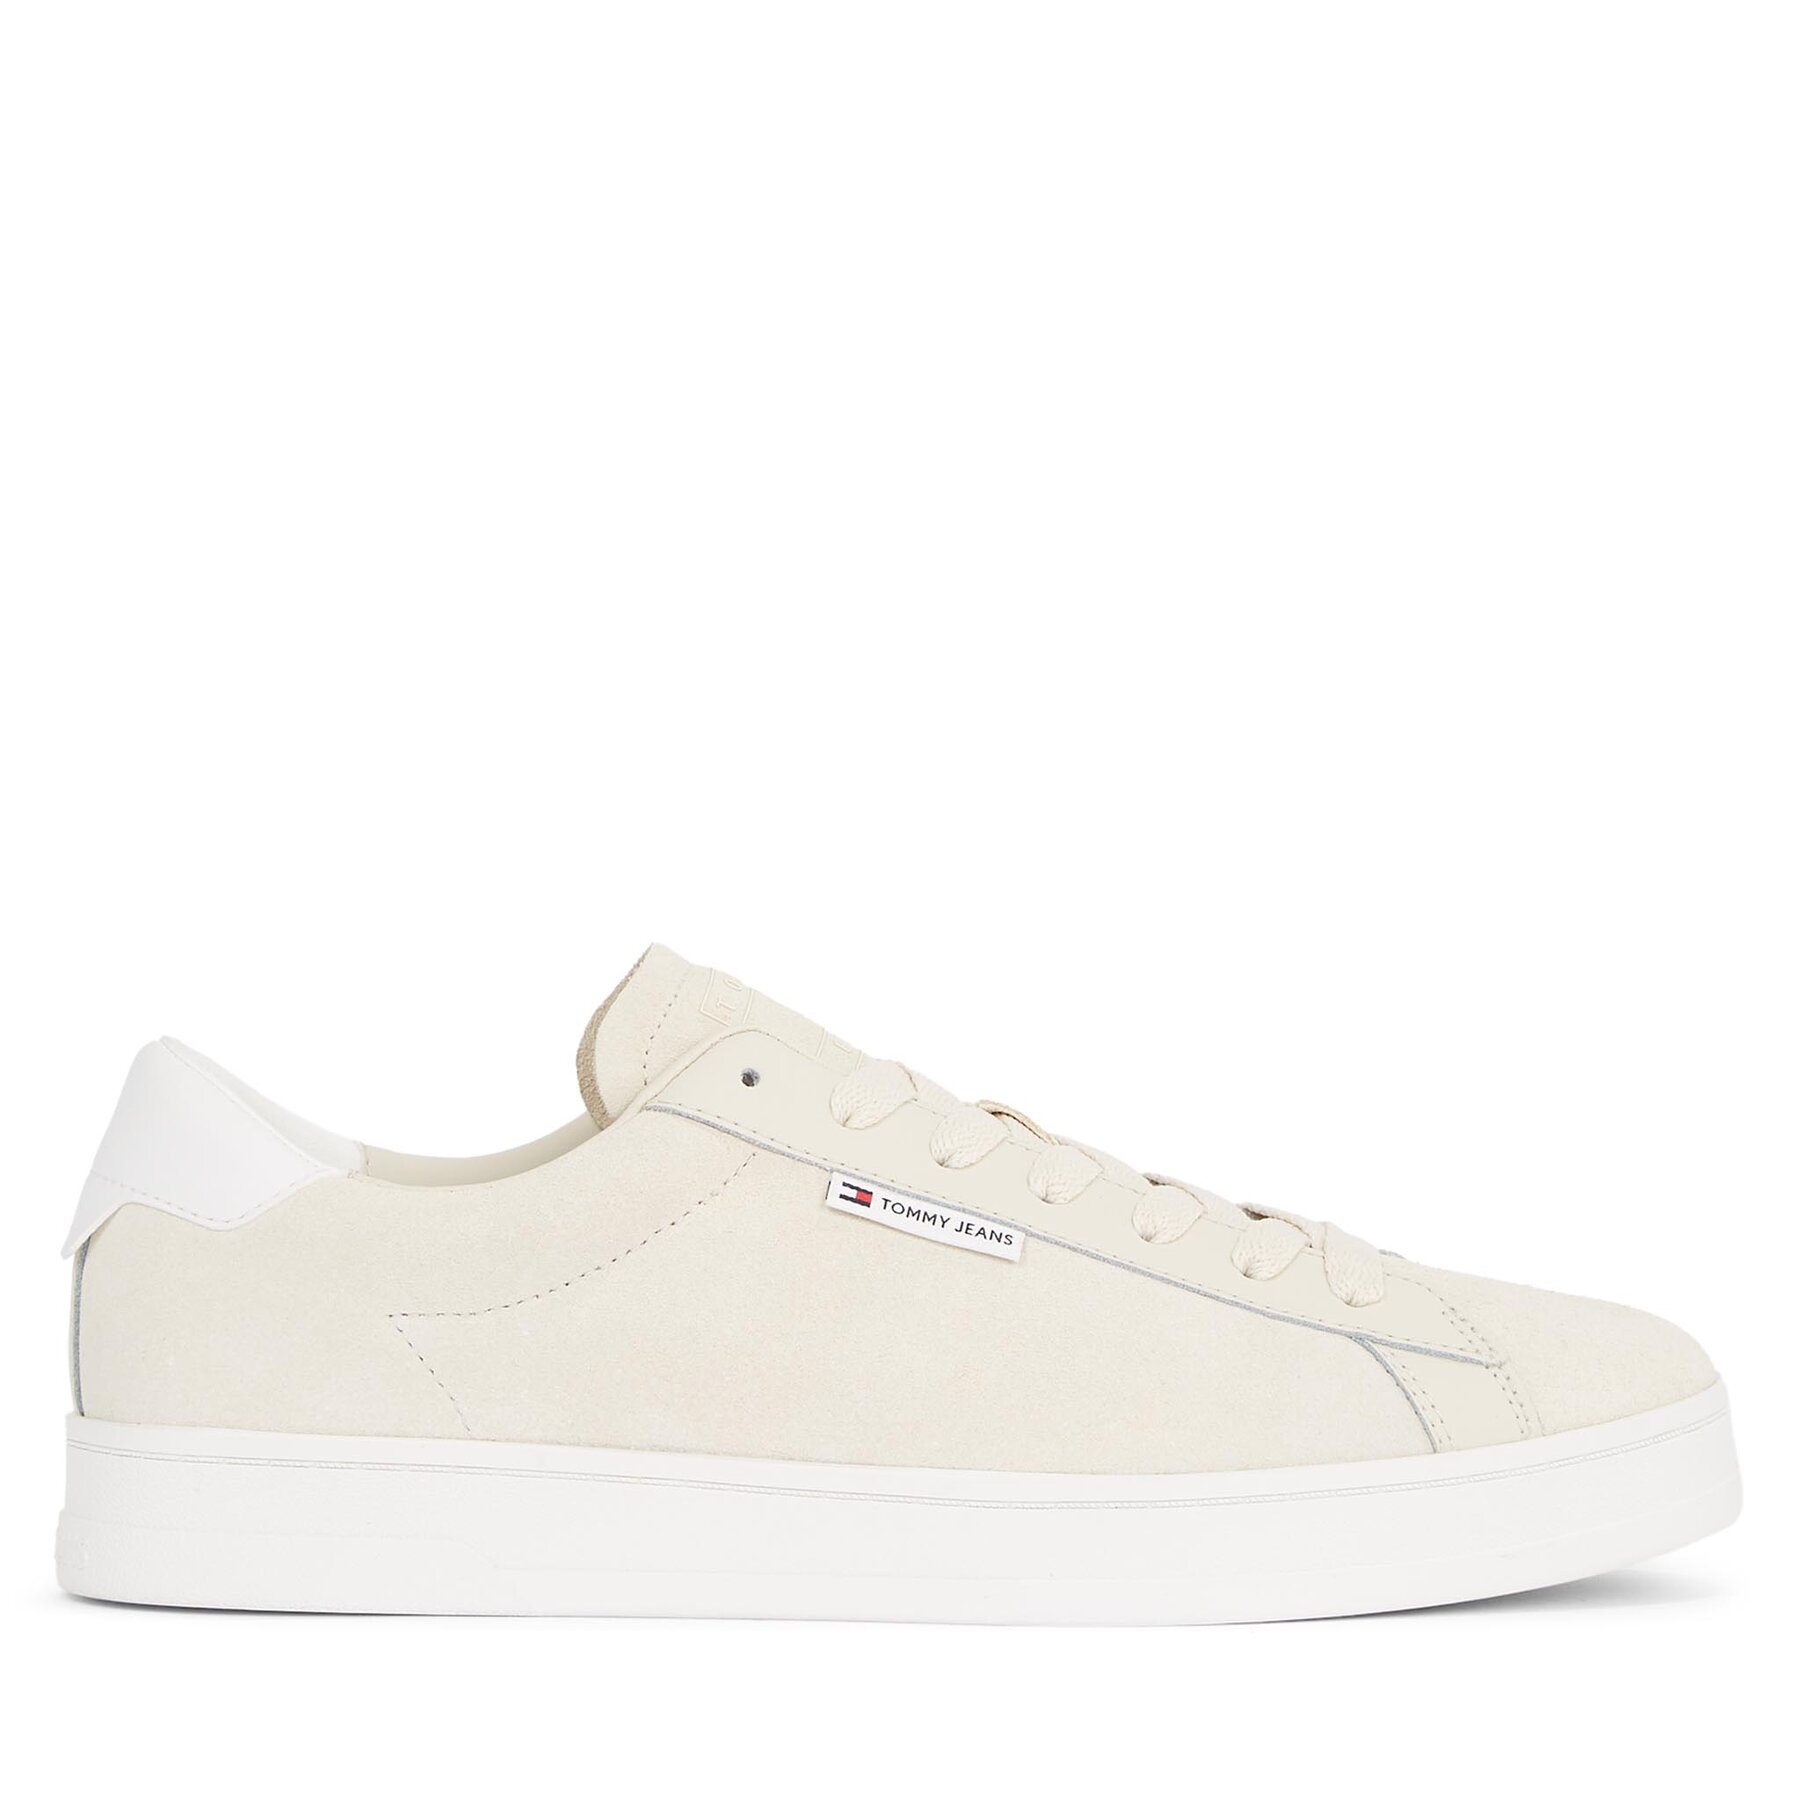 Sneakers Tommy Jeans Tjm Leather Low Cupsole Suede EM0EM01375 Newsprint ACG von Tommy Jeans